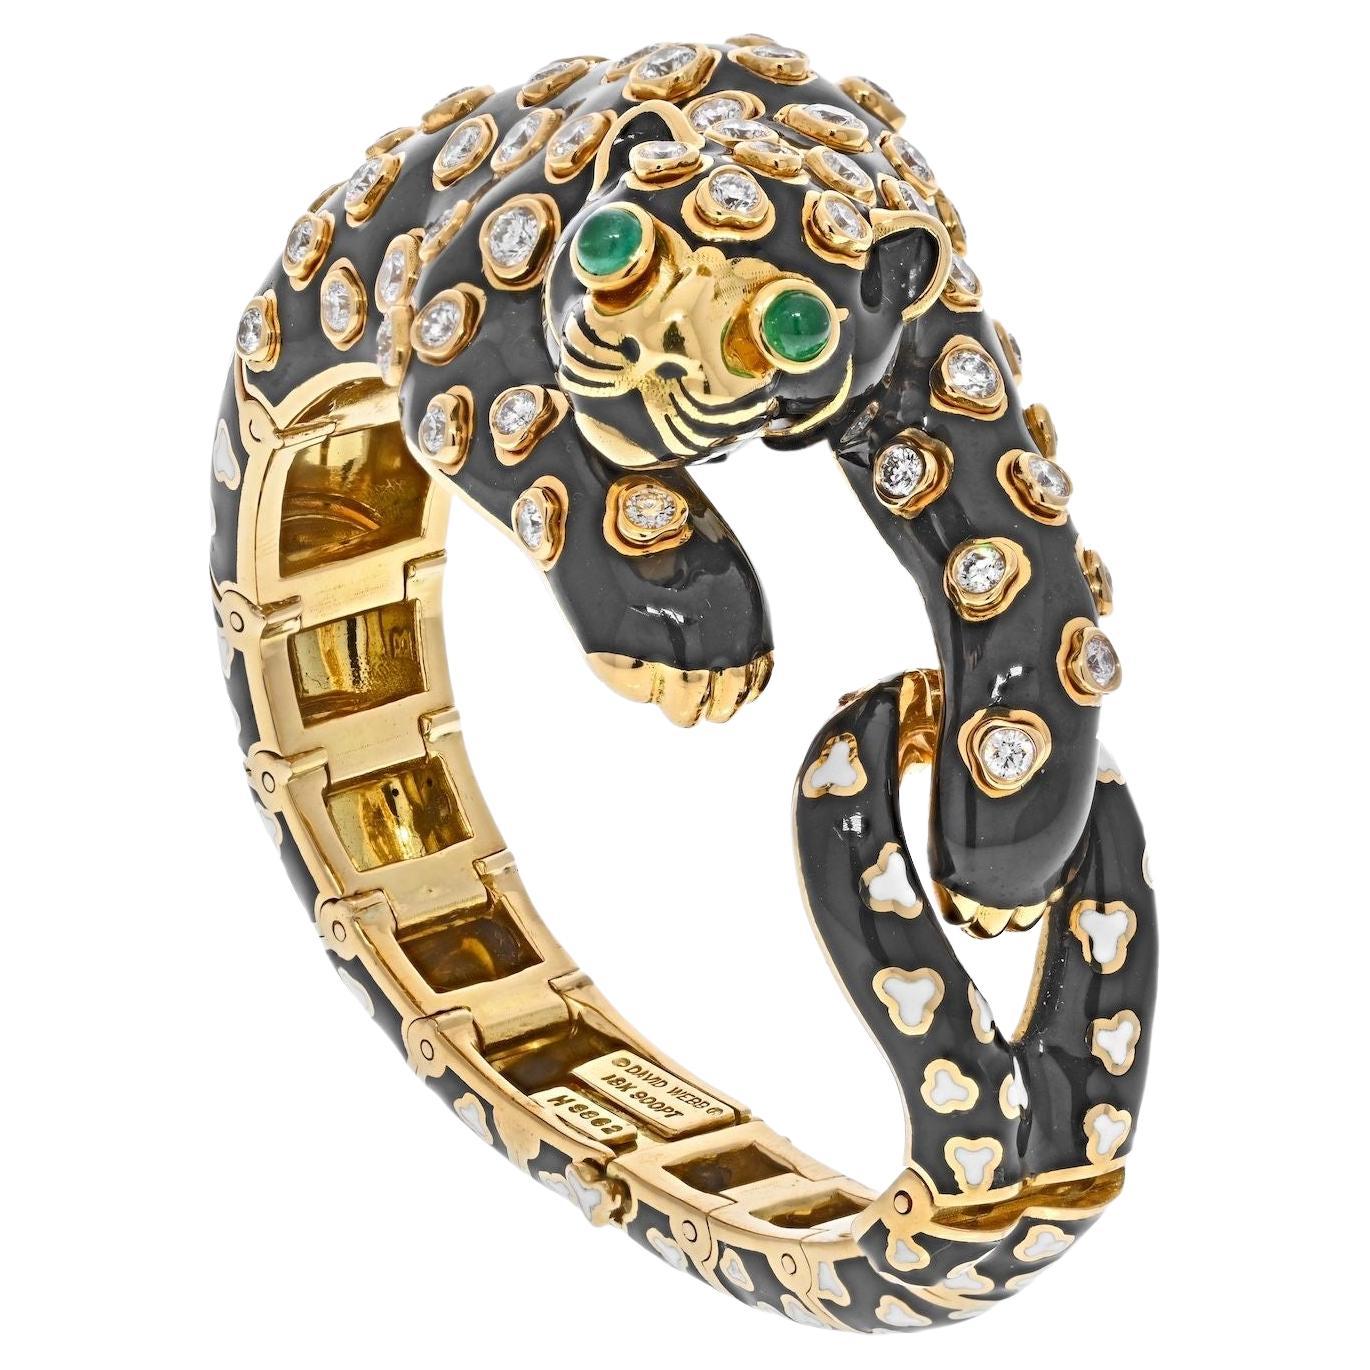 This is a very special animal from David Webb's Animal Kingdom collection: black enamel Leopard bracelet made with yellow gold, platinum, diamonds, emeralds, and black and white enamel. This cute leopard will become your favorite bracelet in your